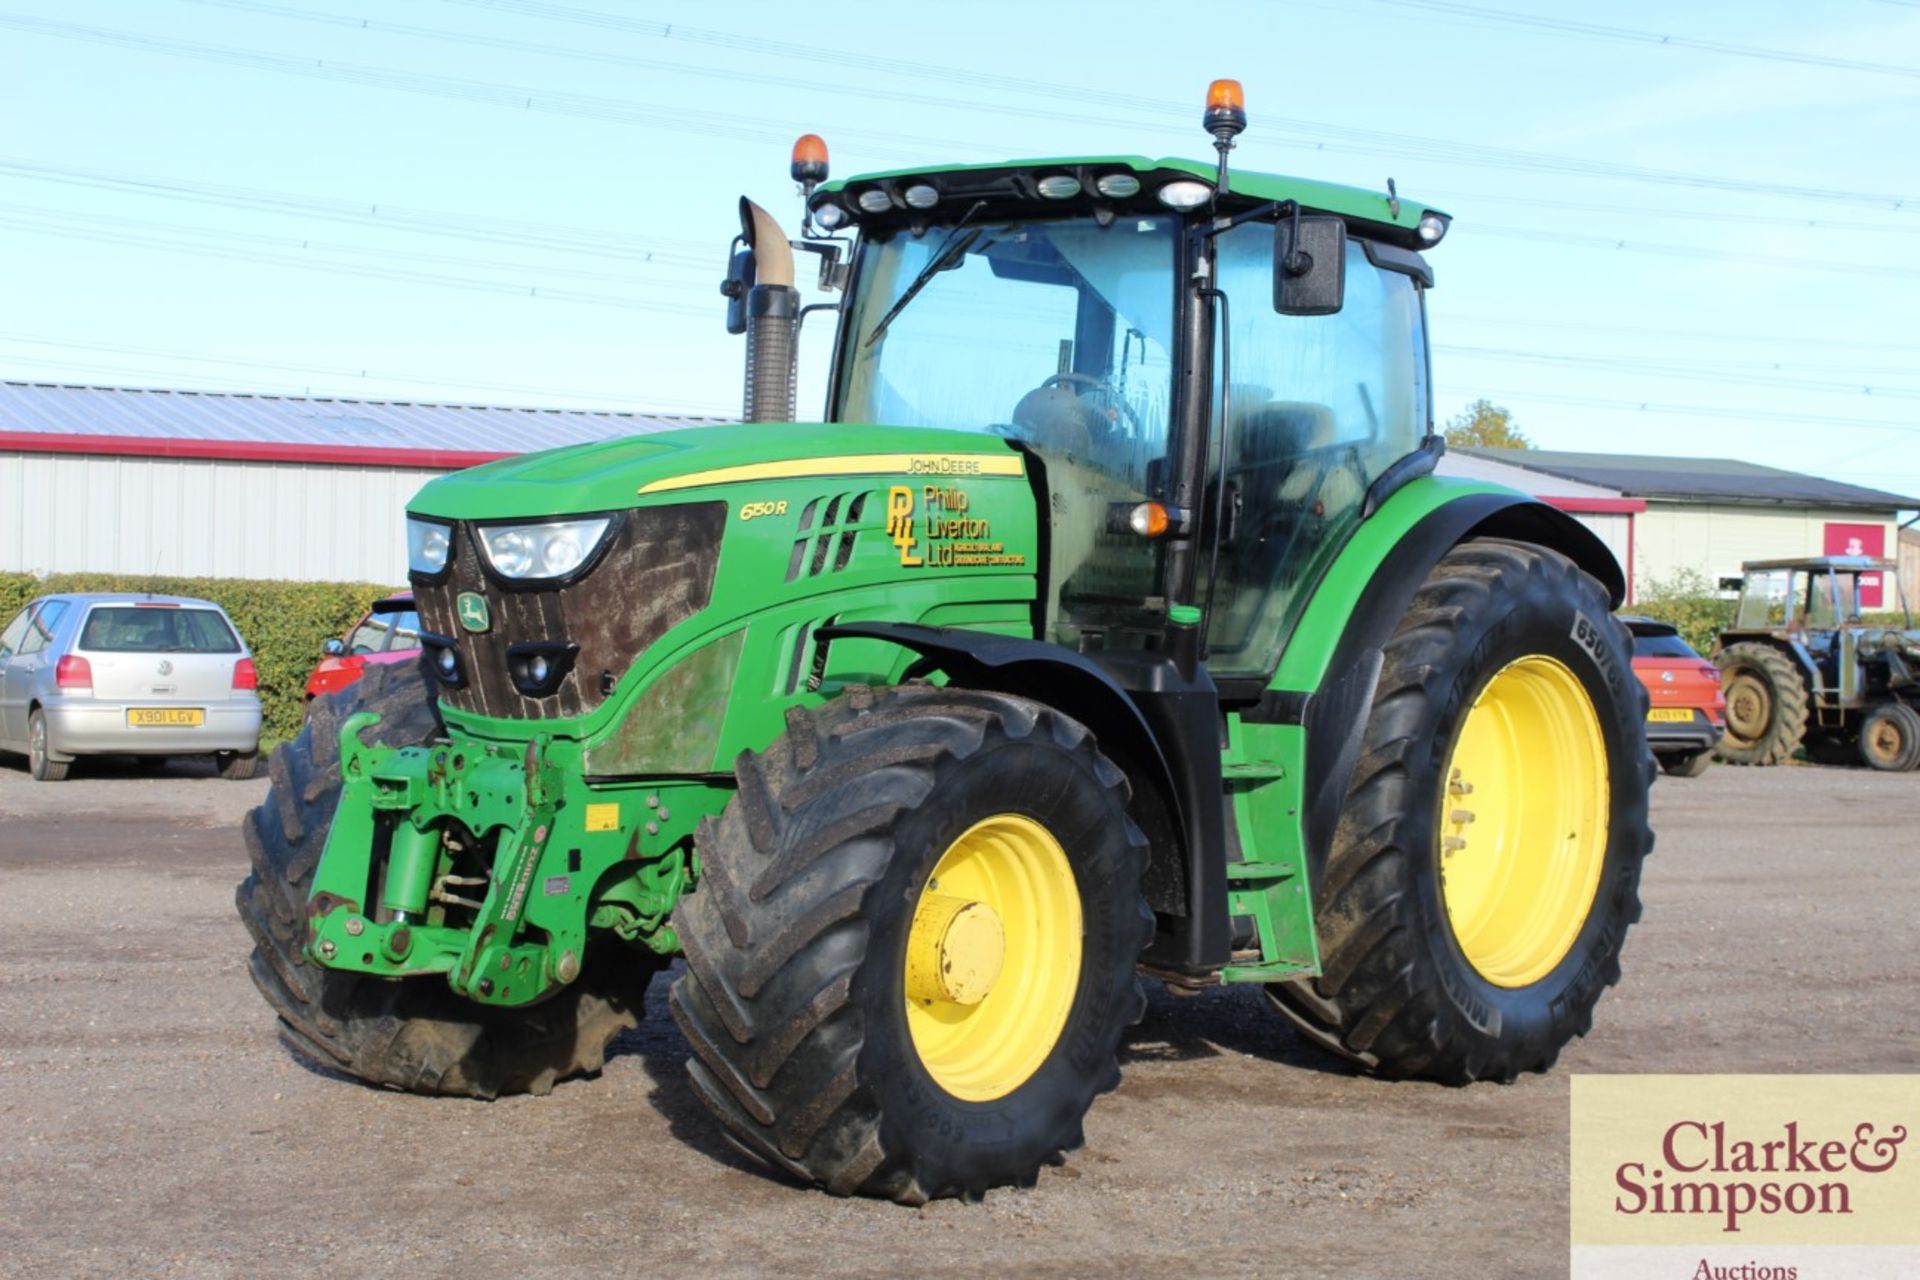 John Deere 6150R 4WD tractor. Registration AX15 VZF. Date of first registration 25/06/2015. 4,792